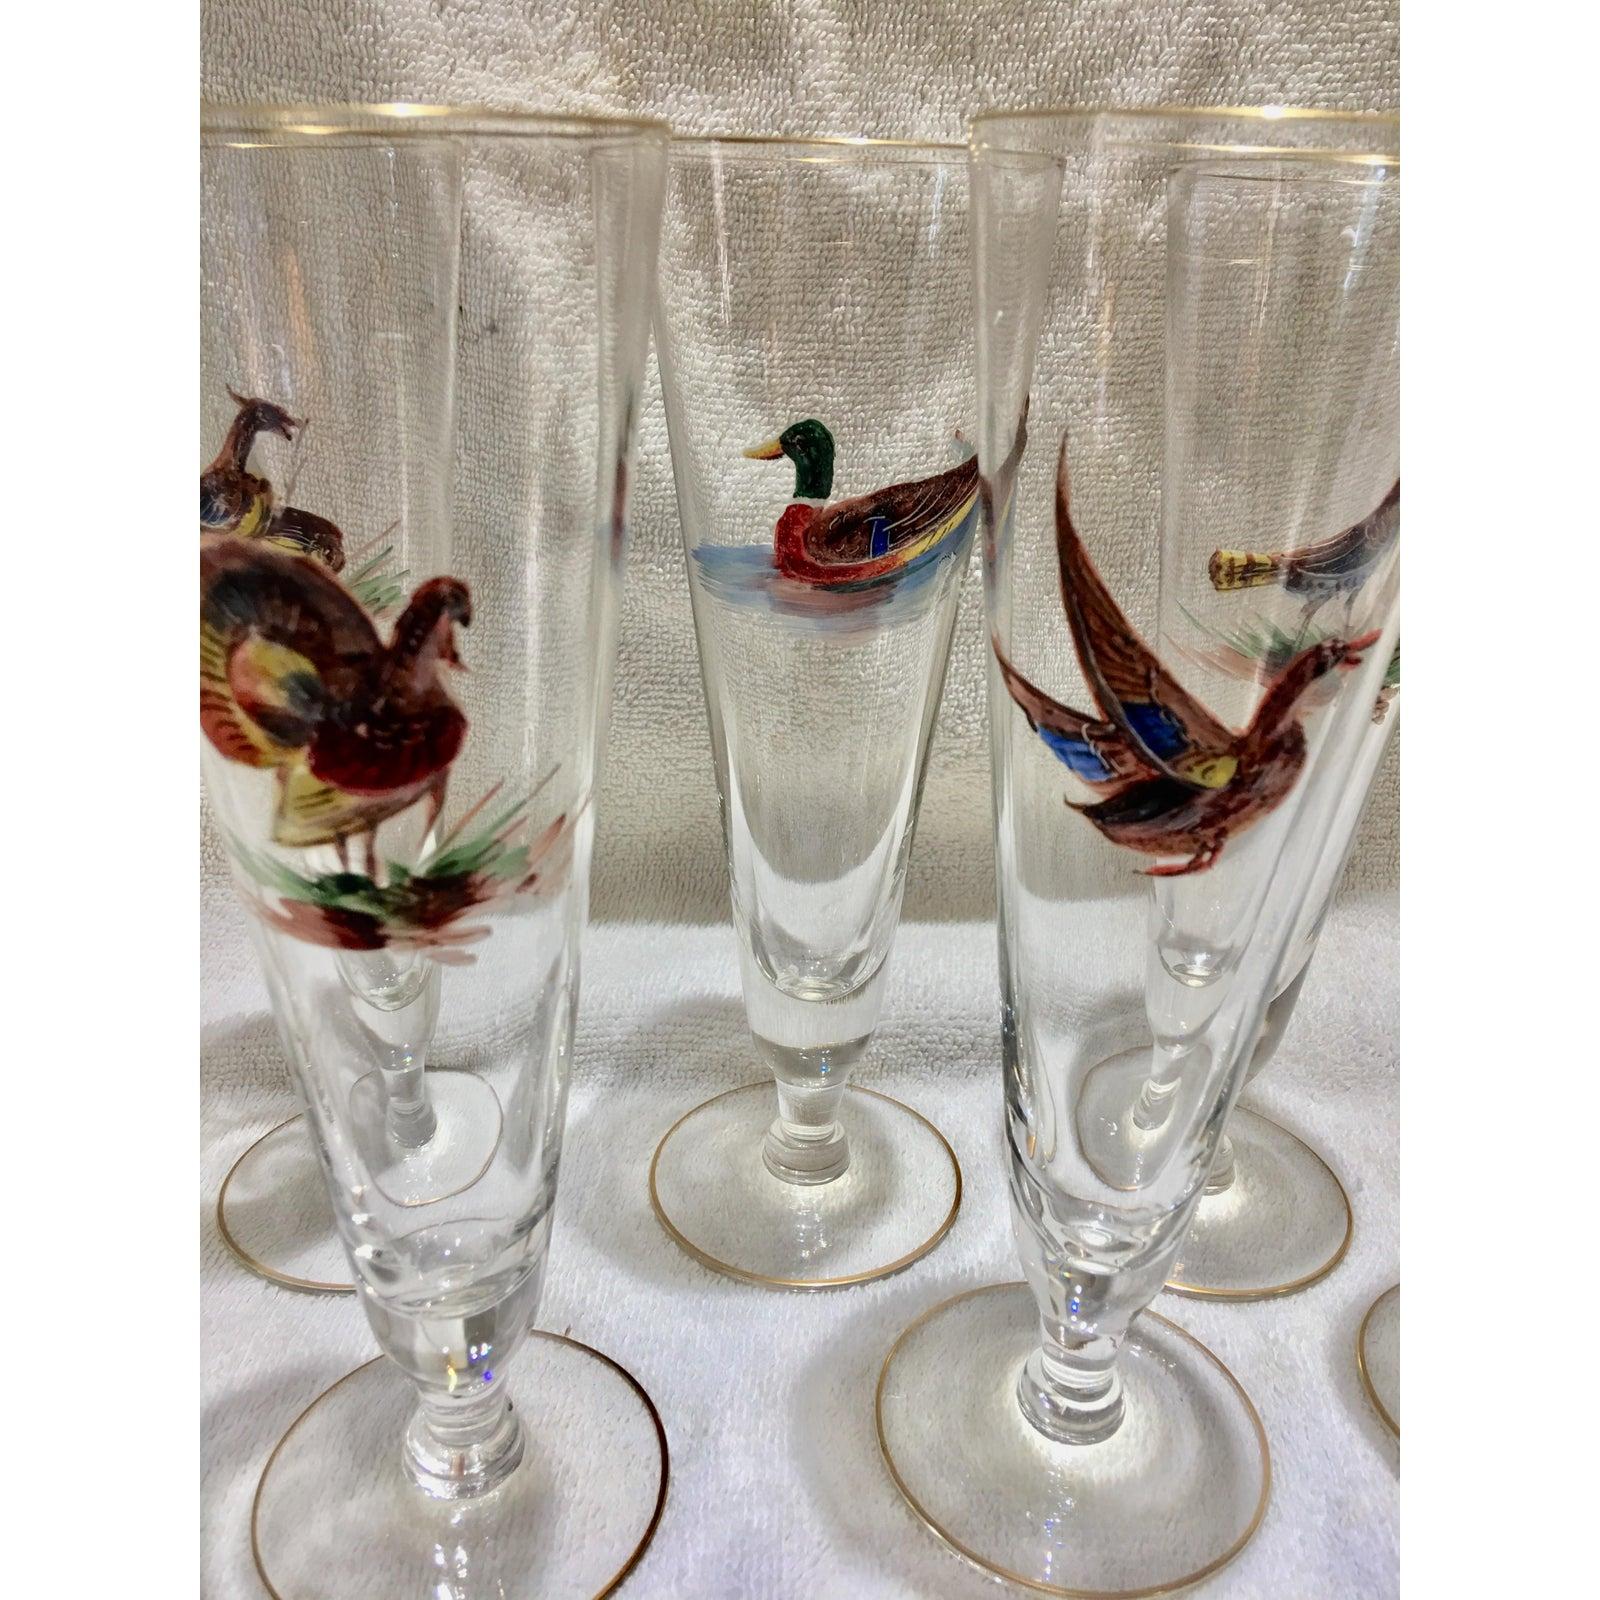 European Set of 8 Tall Pilsner Glasses or Champagne Flutes with Enameled Birds